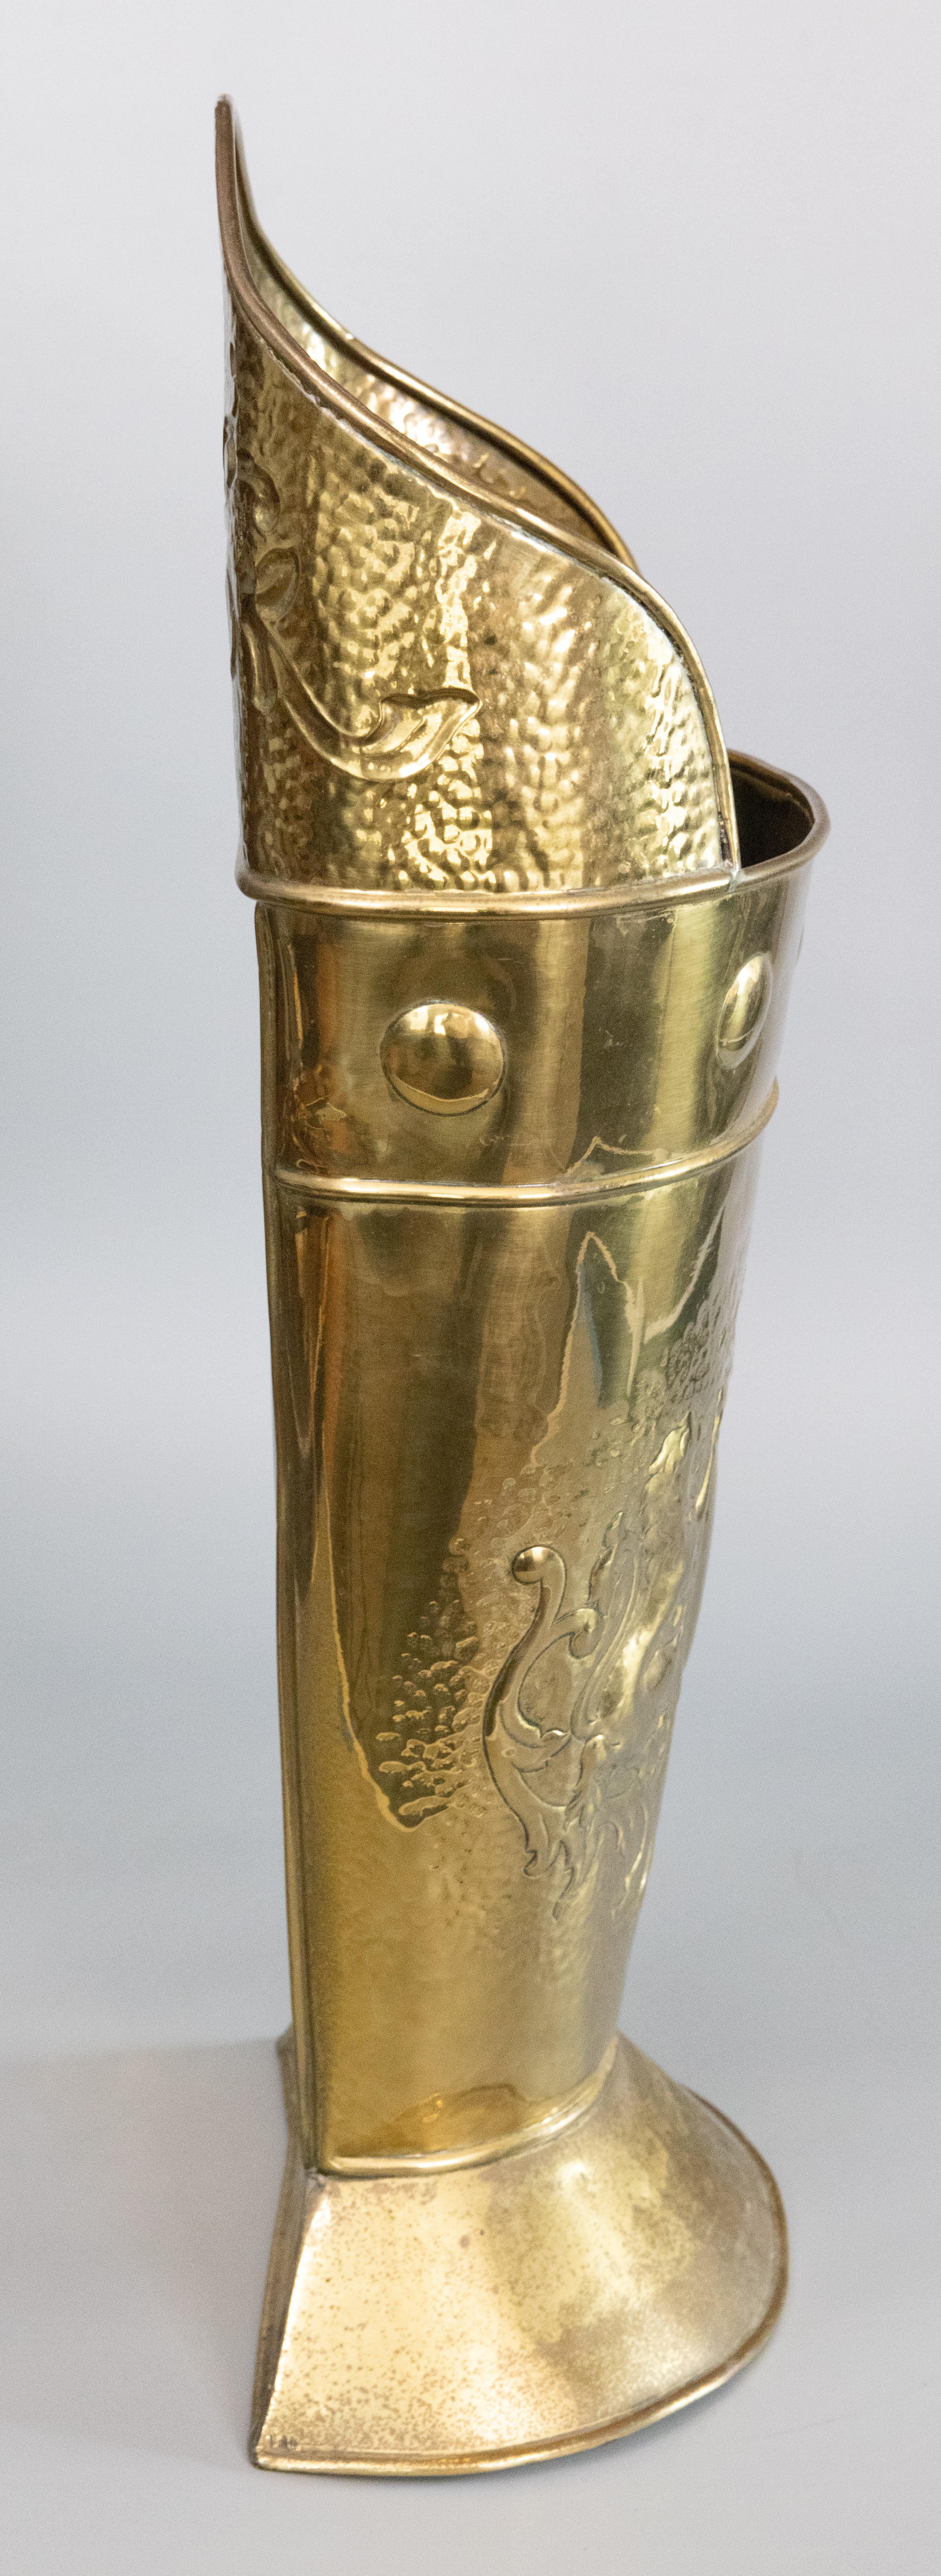 19th Century French Heraldic Hammered Brass Repoussé Grape Hod Umbrella Stand For Sale 2